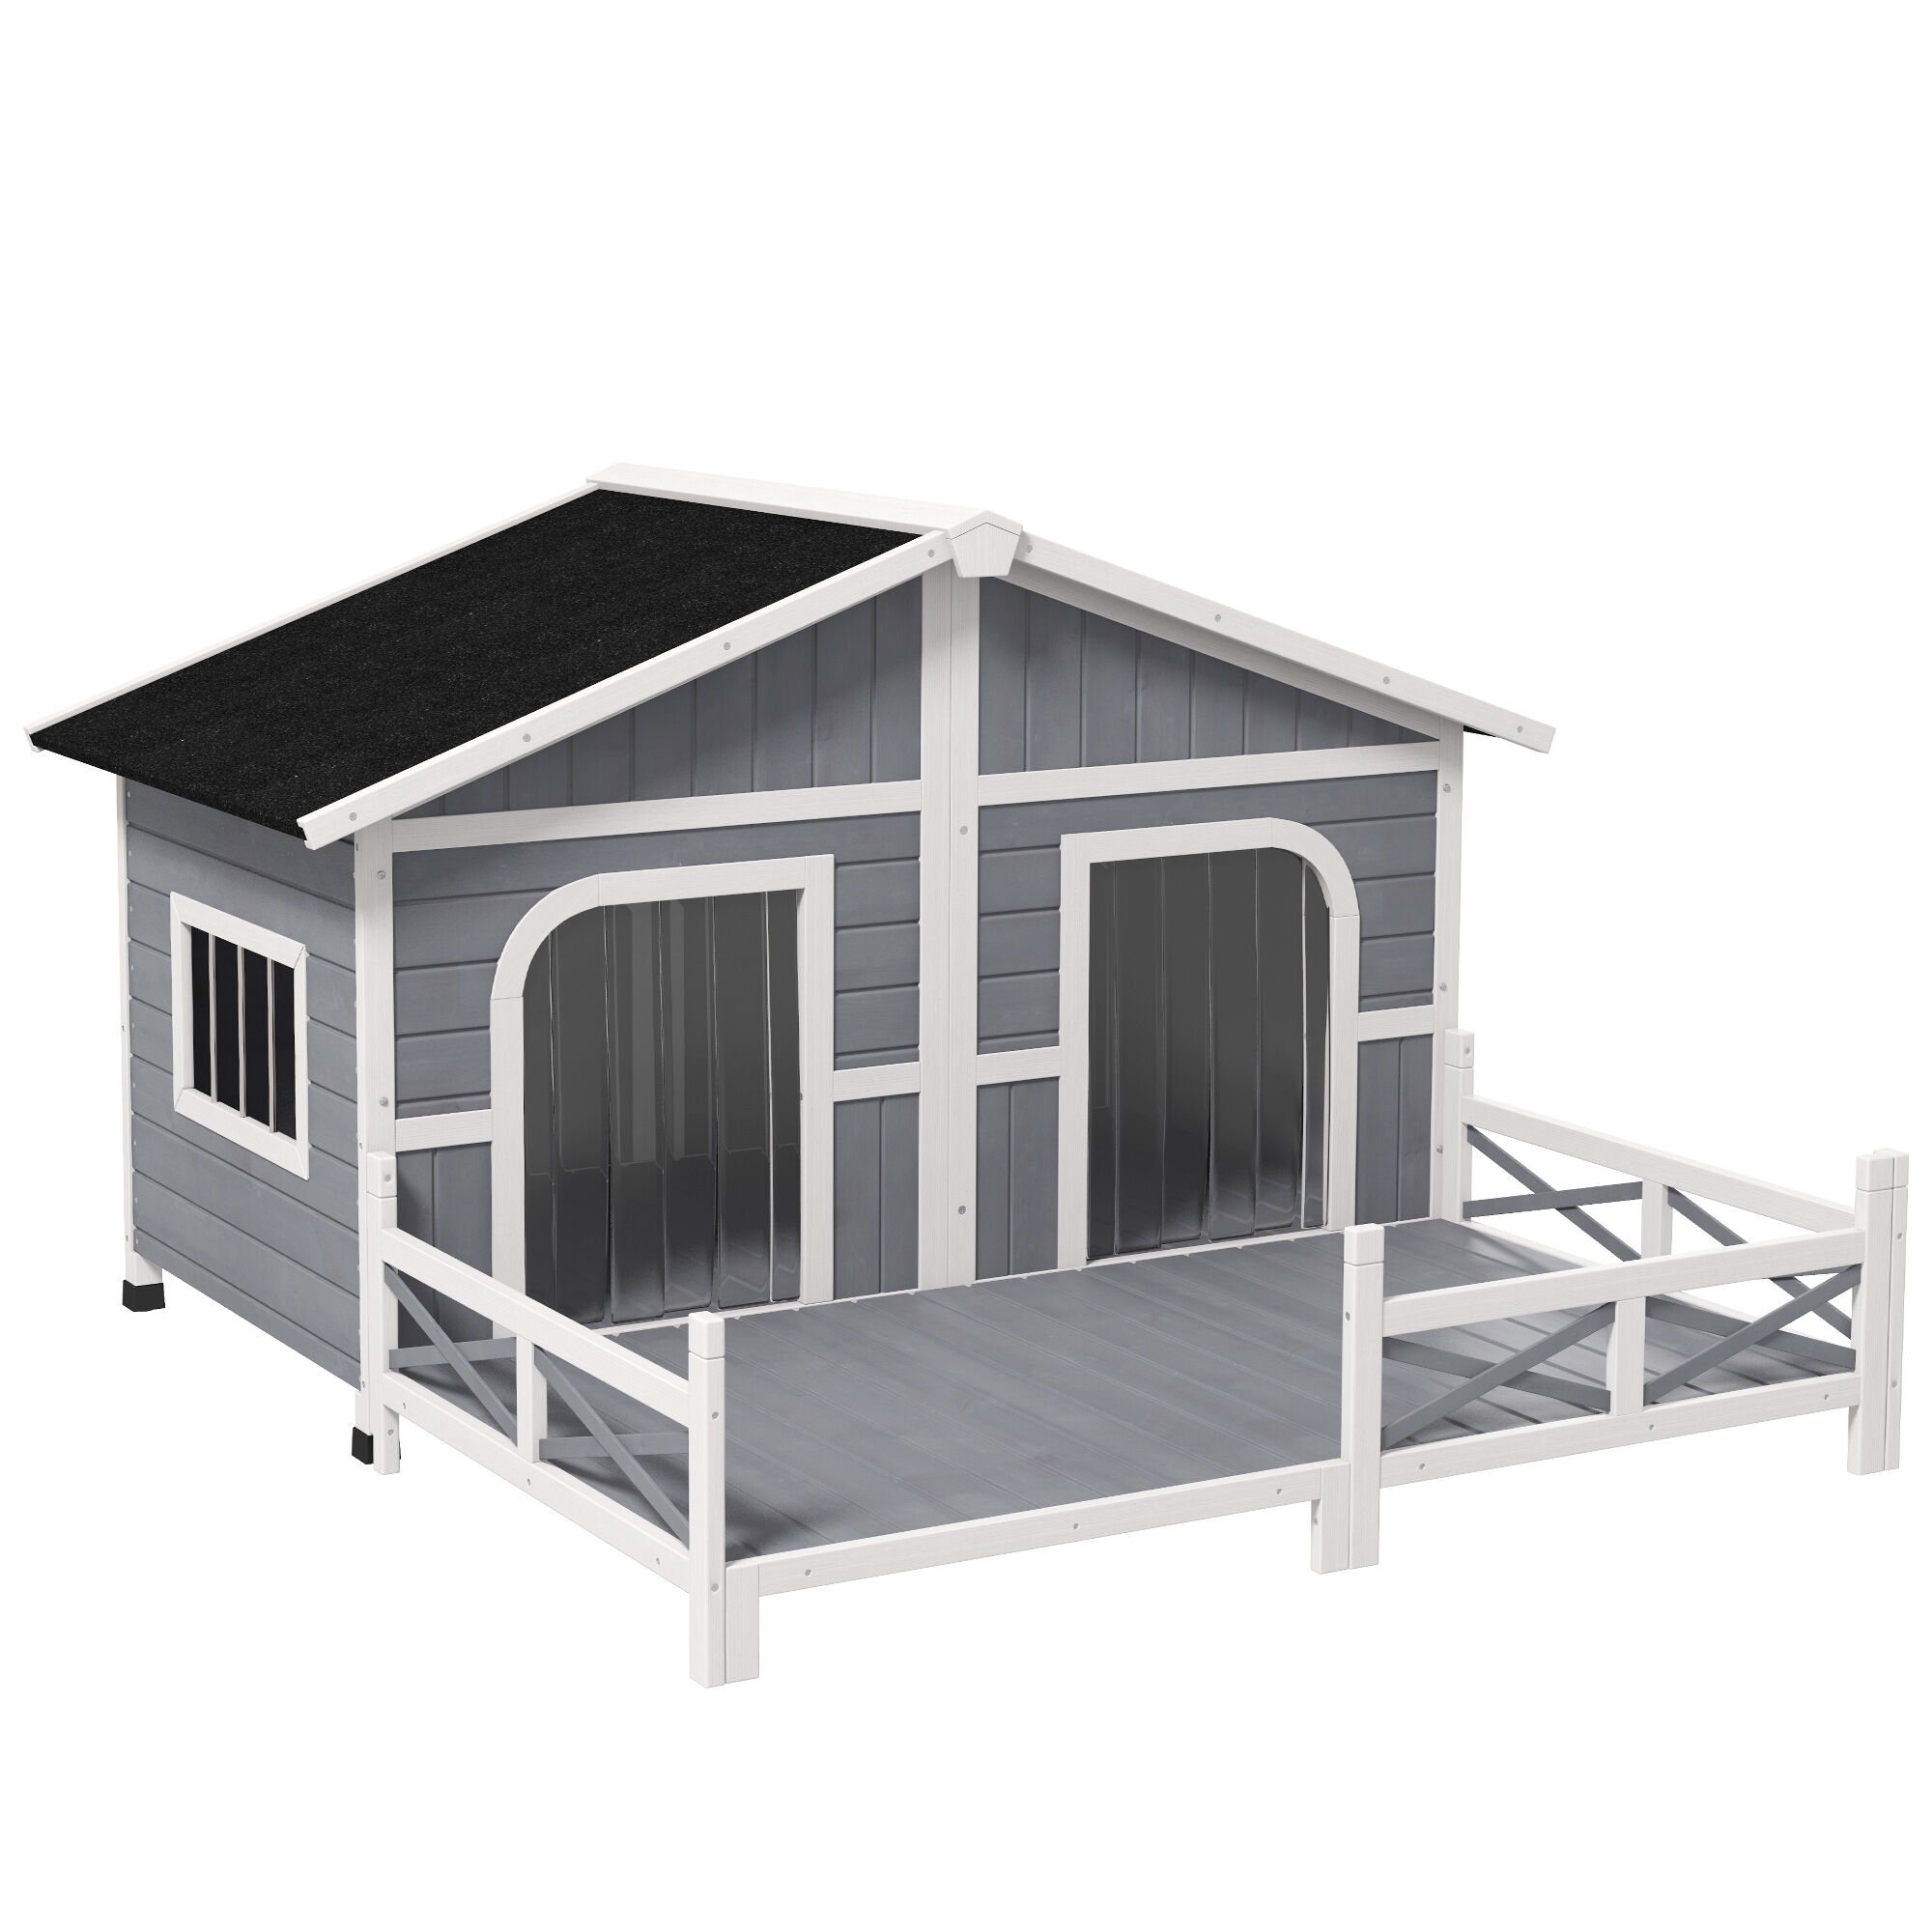 PawHut Wooden Large Dog House Outdoor Cabin Style Elevated Pet Shelter with Porch, for Small and Medium Breed Dogs, Gray